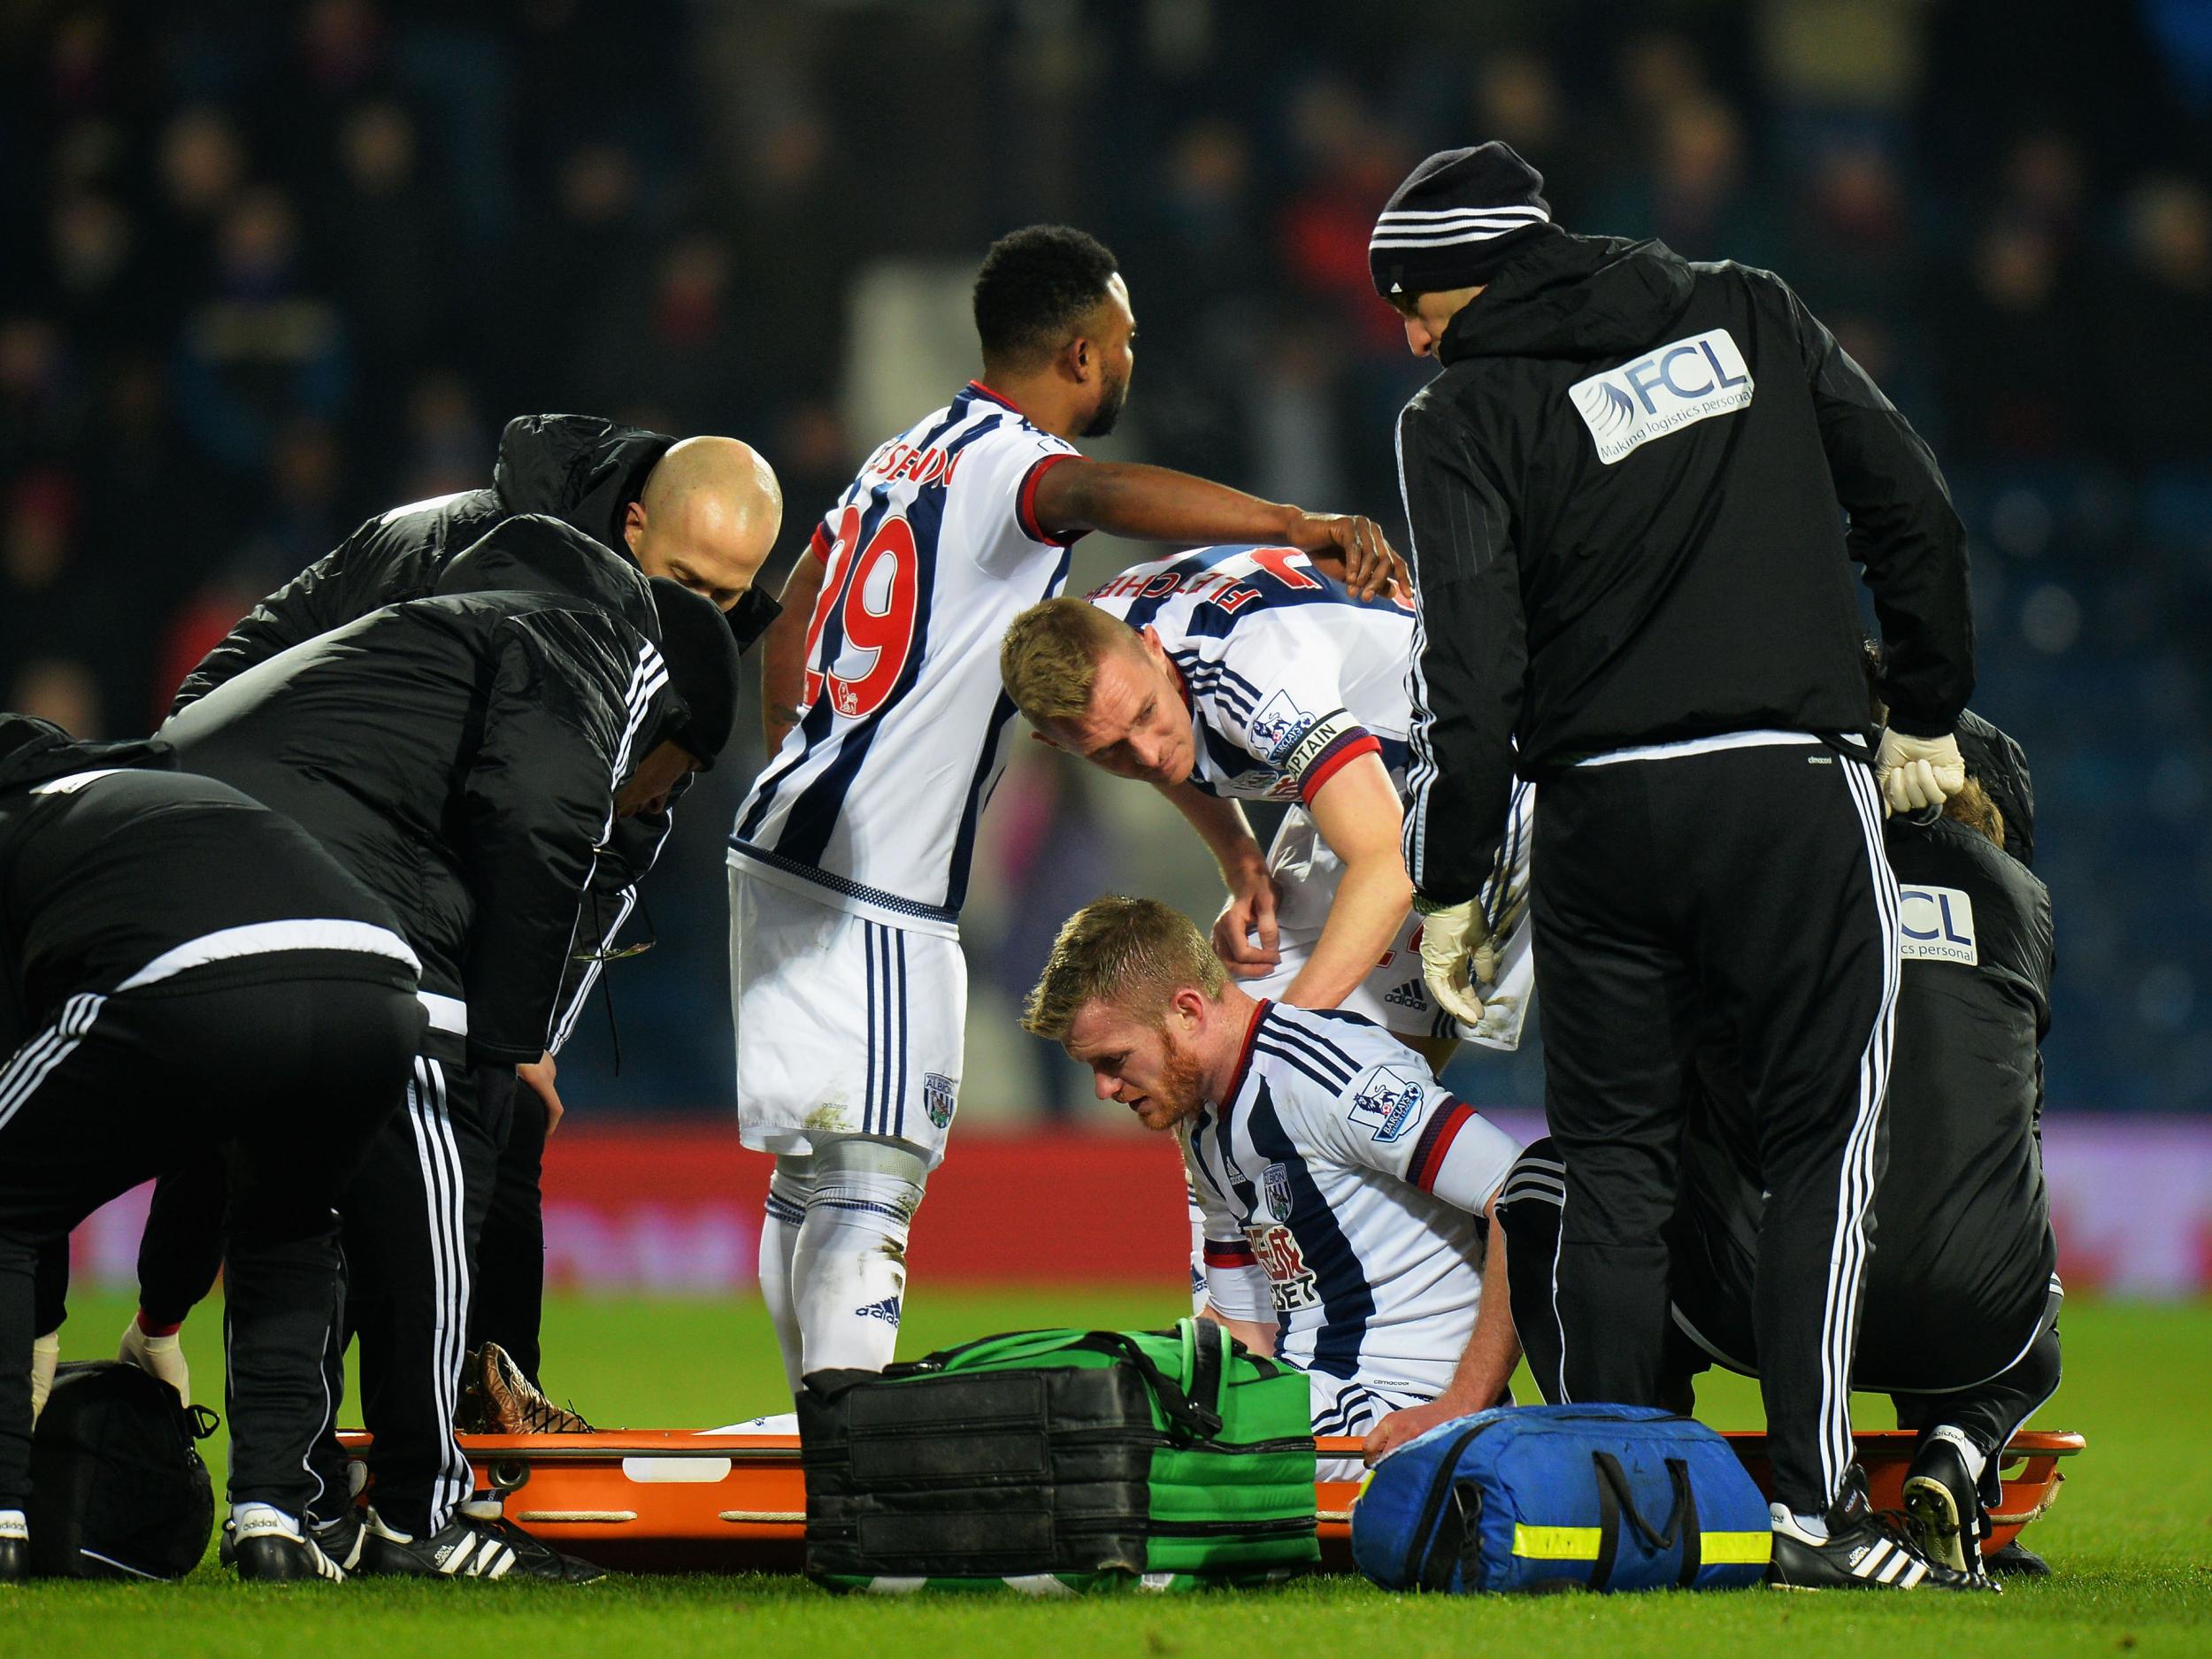 Chris Brunt receives treatment after falling awkwardly